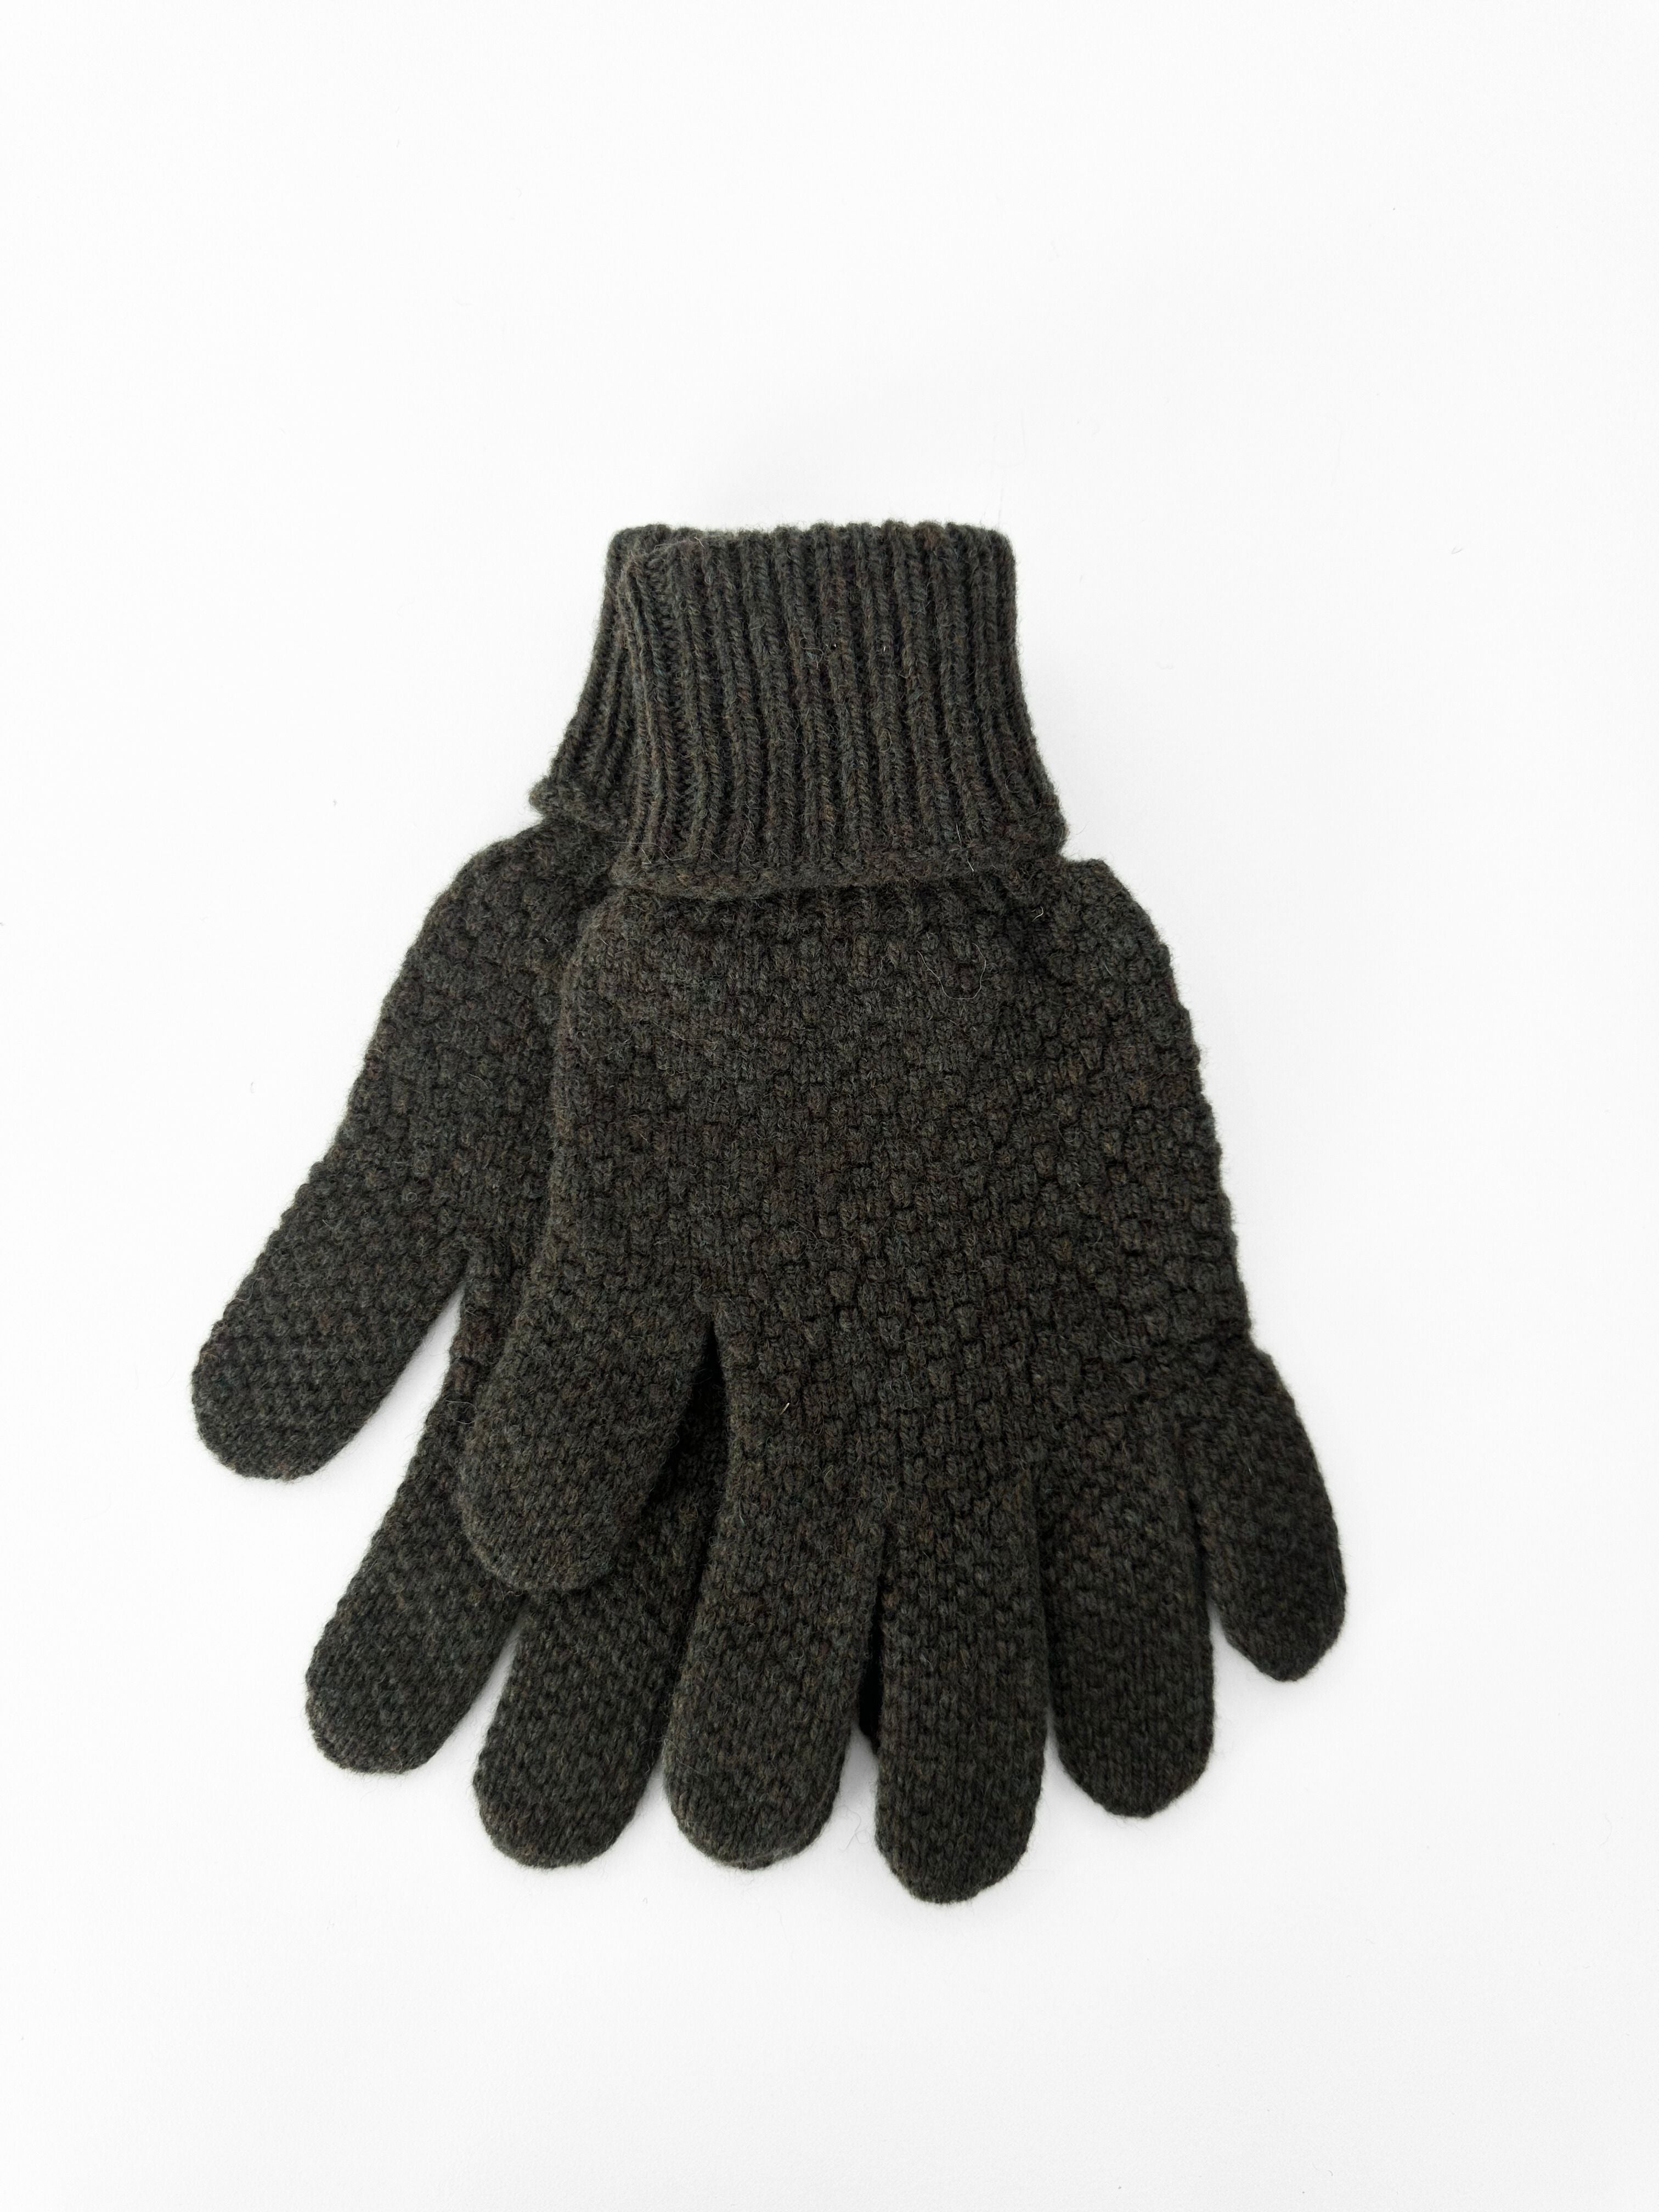 Men's Mittens - Army Green